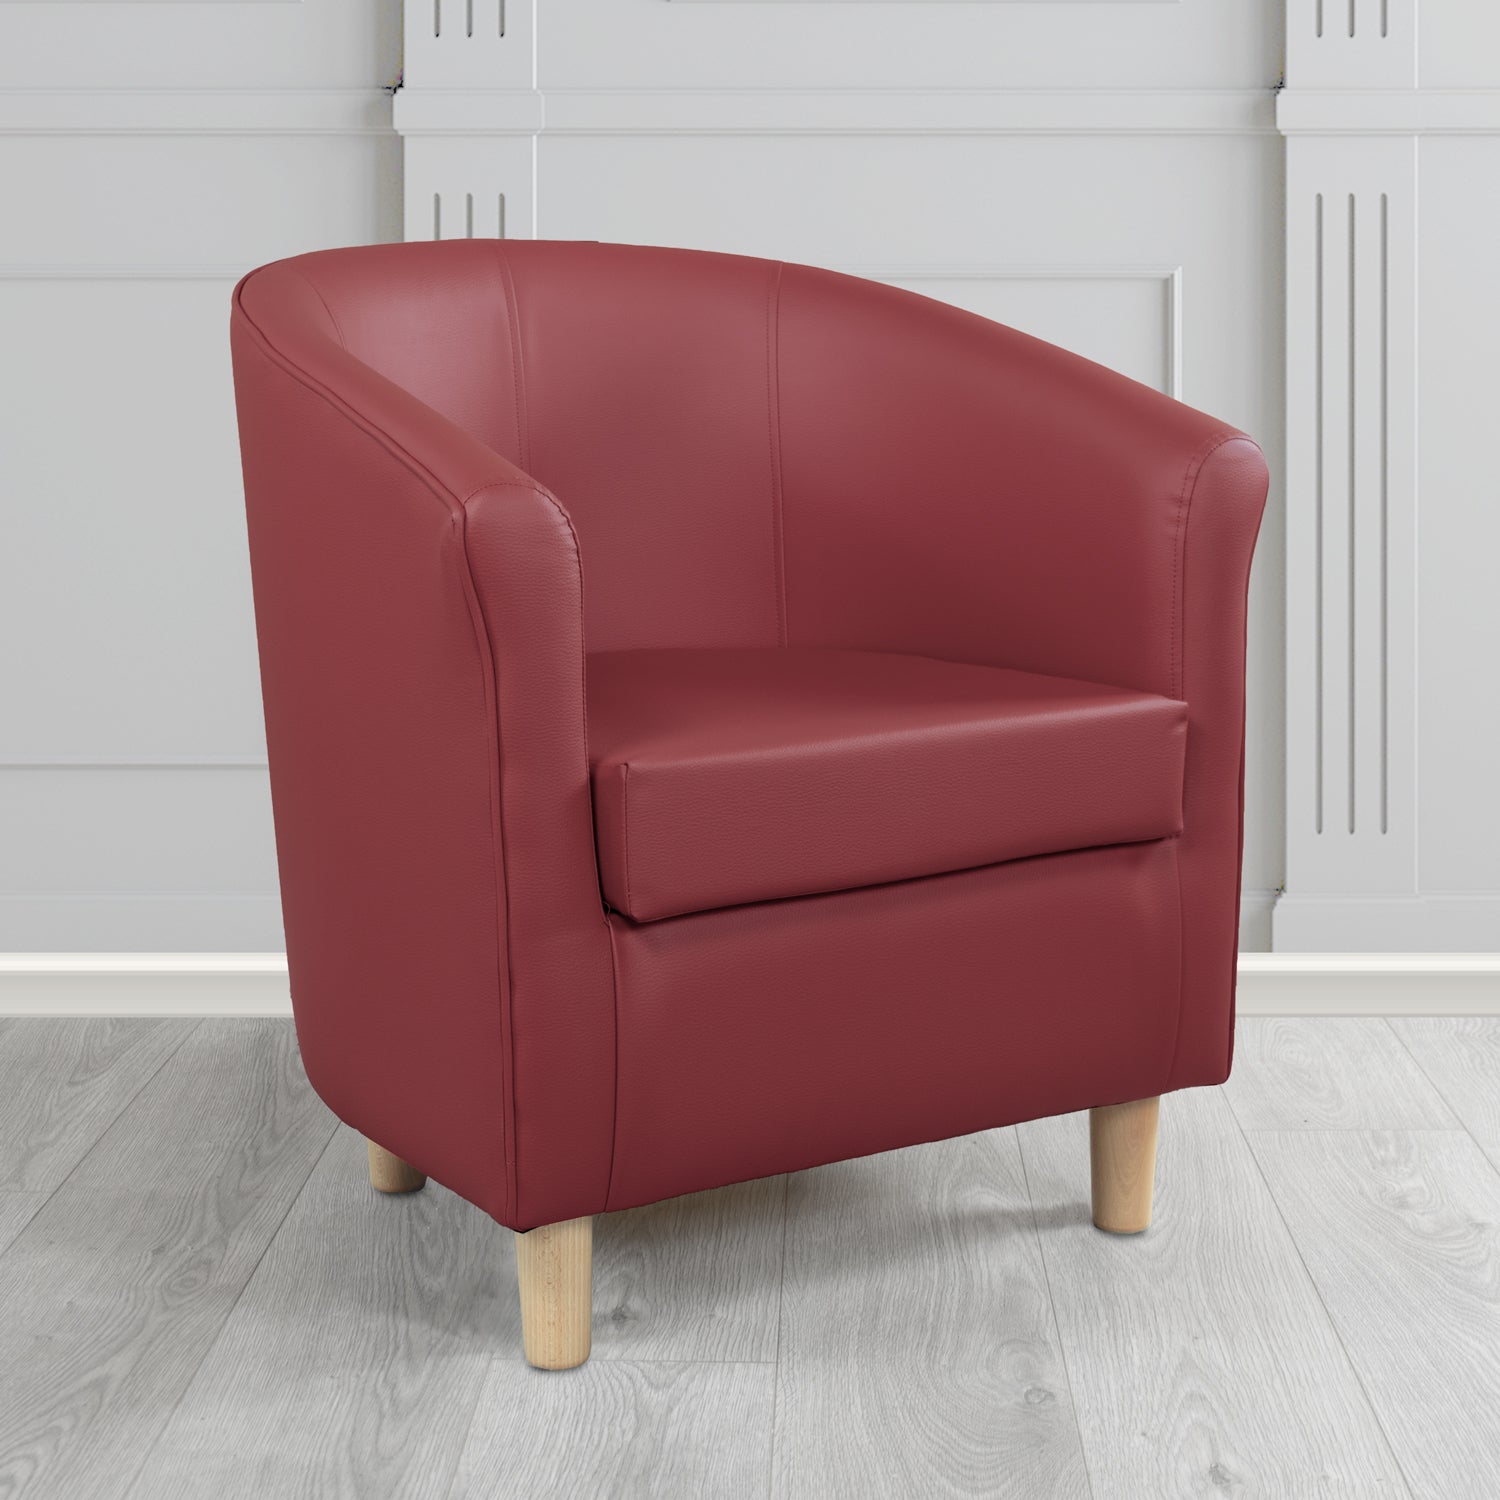 Tuscany Just Colour Mulled Wine Antimicrobial Crib 5 Contract Faux Leather Tub Chair - The Tub Chair Shop